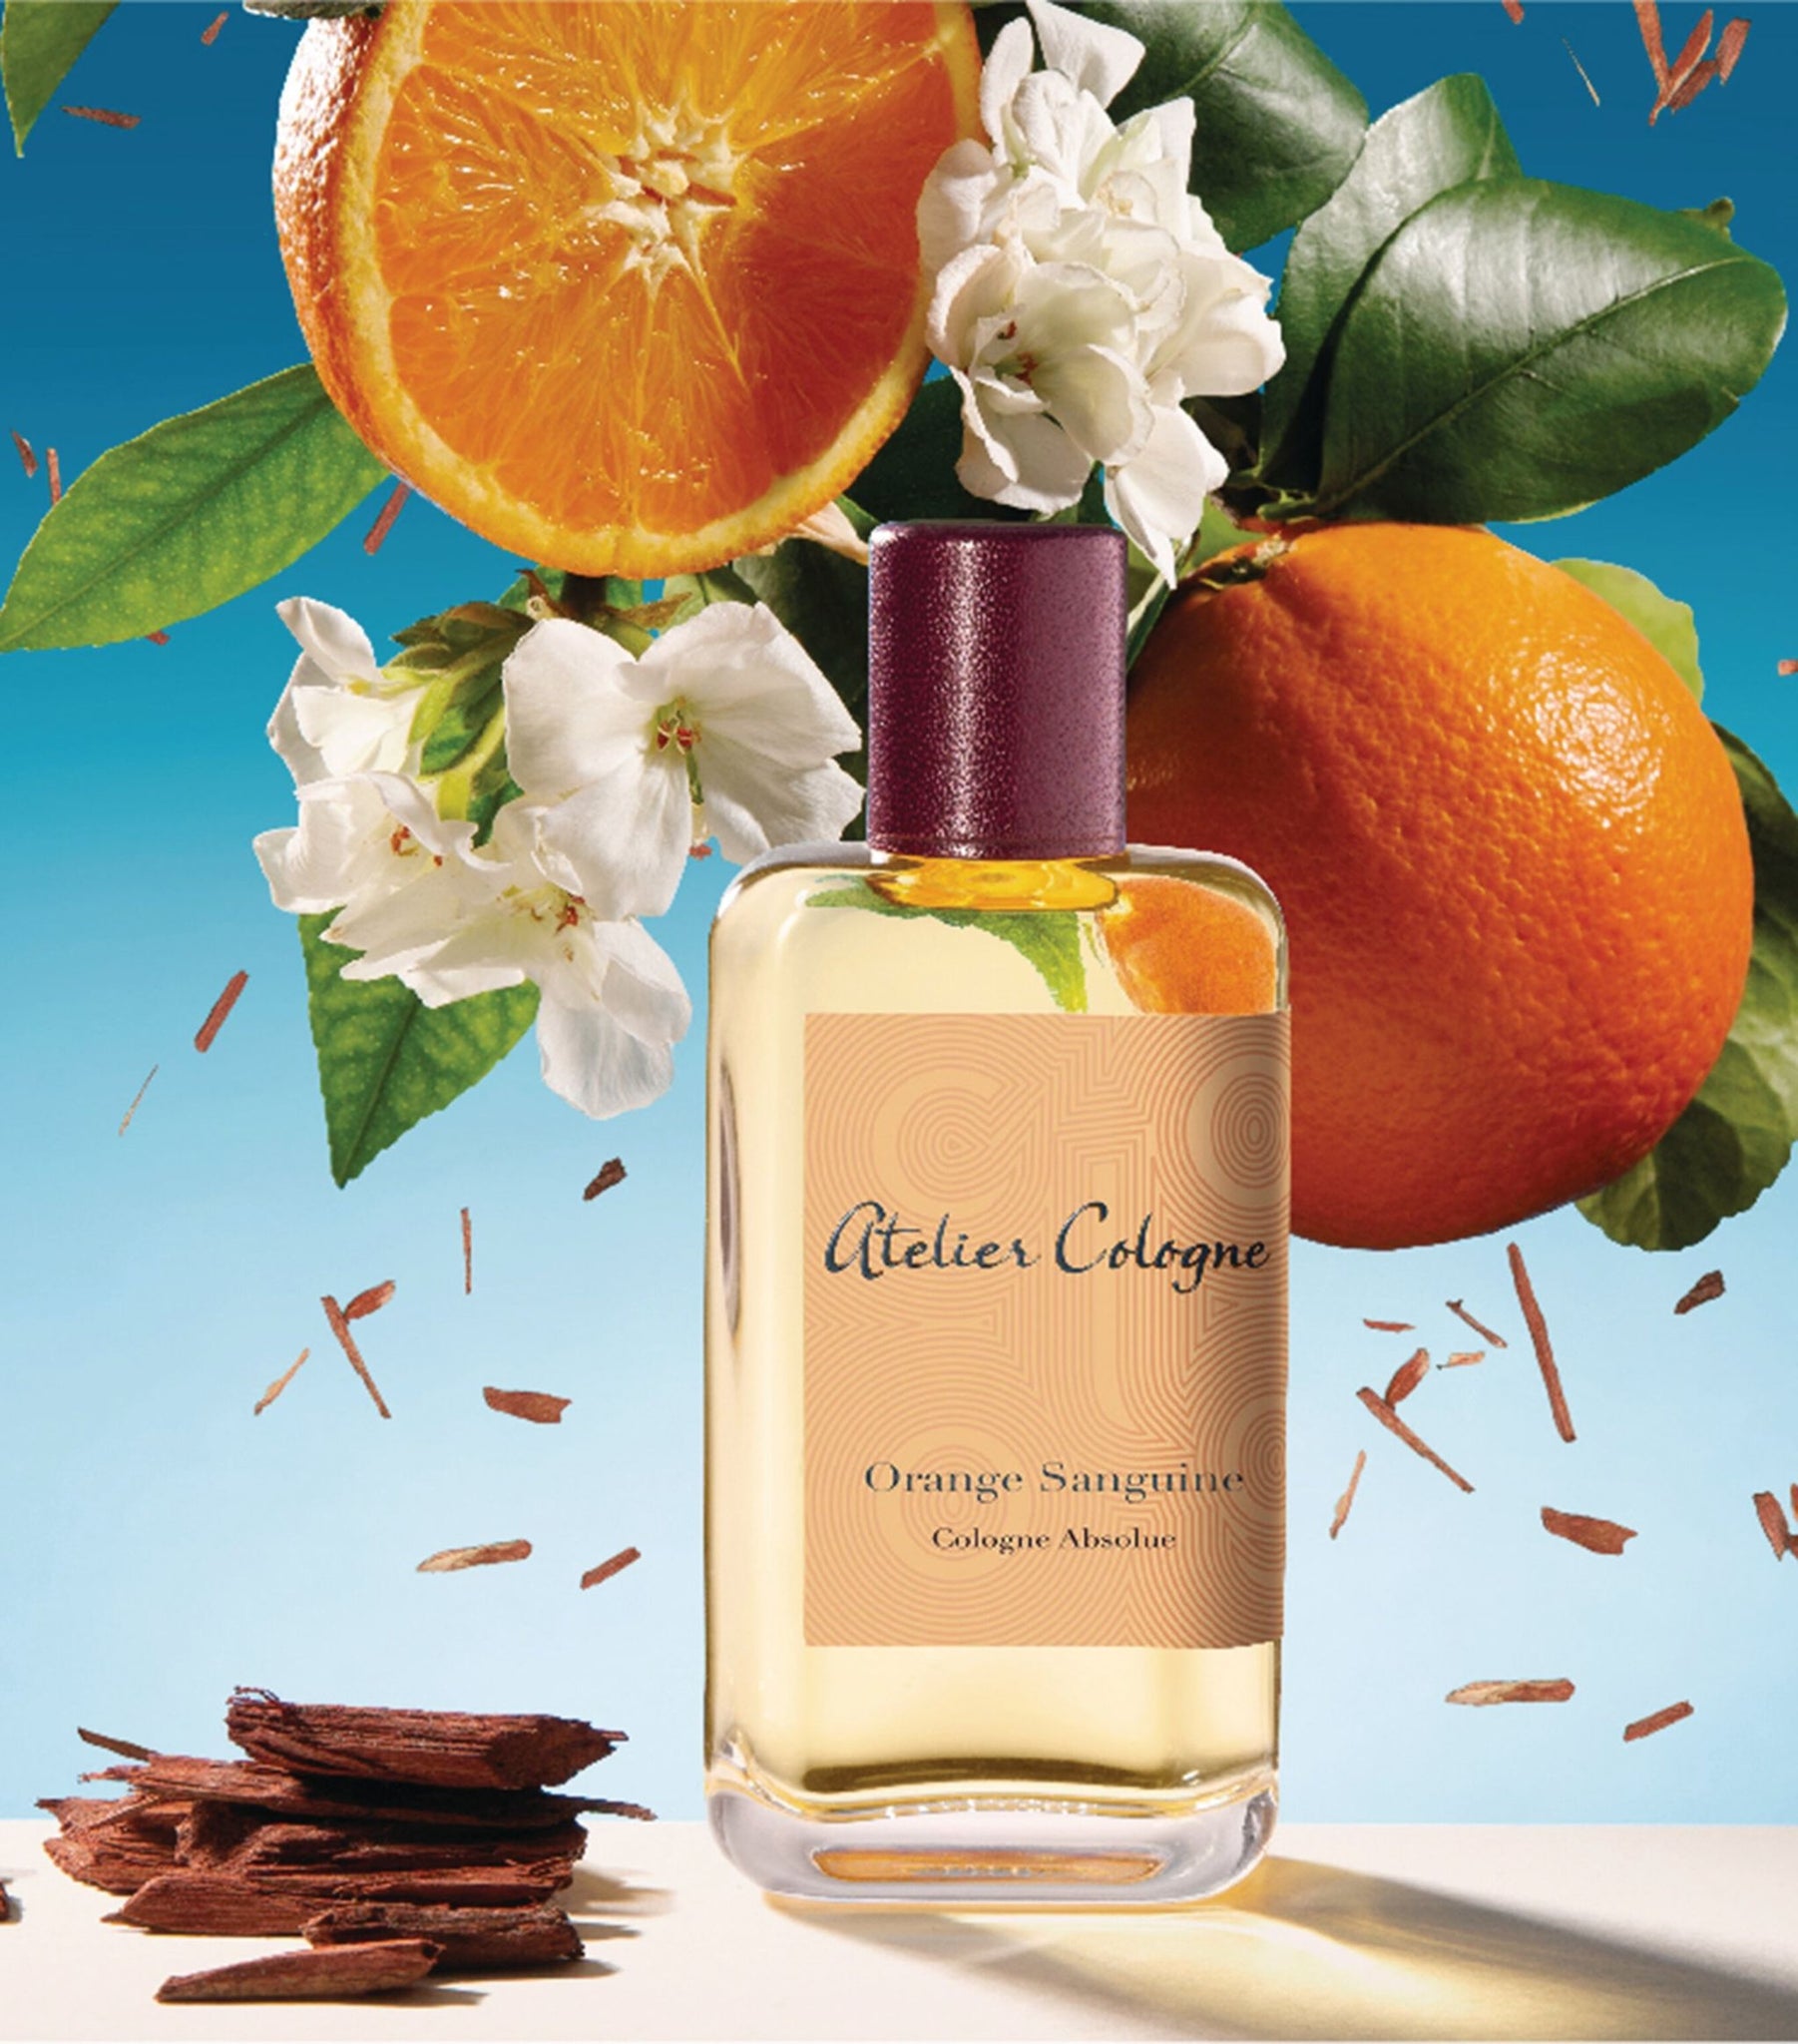 Atelier Cologne Orange Sanguine Cologne Absolue 100ML - ROOYAS